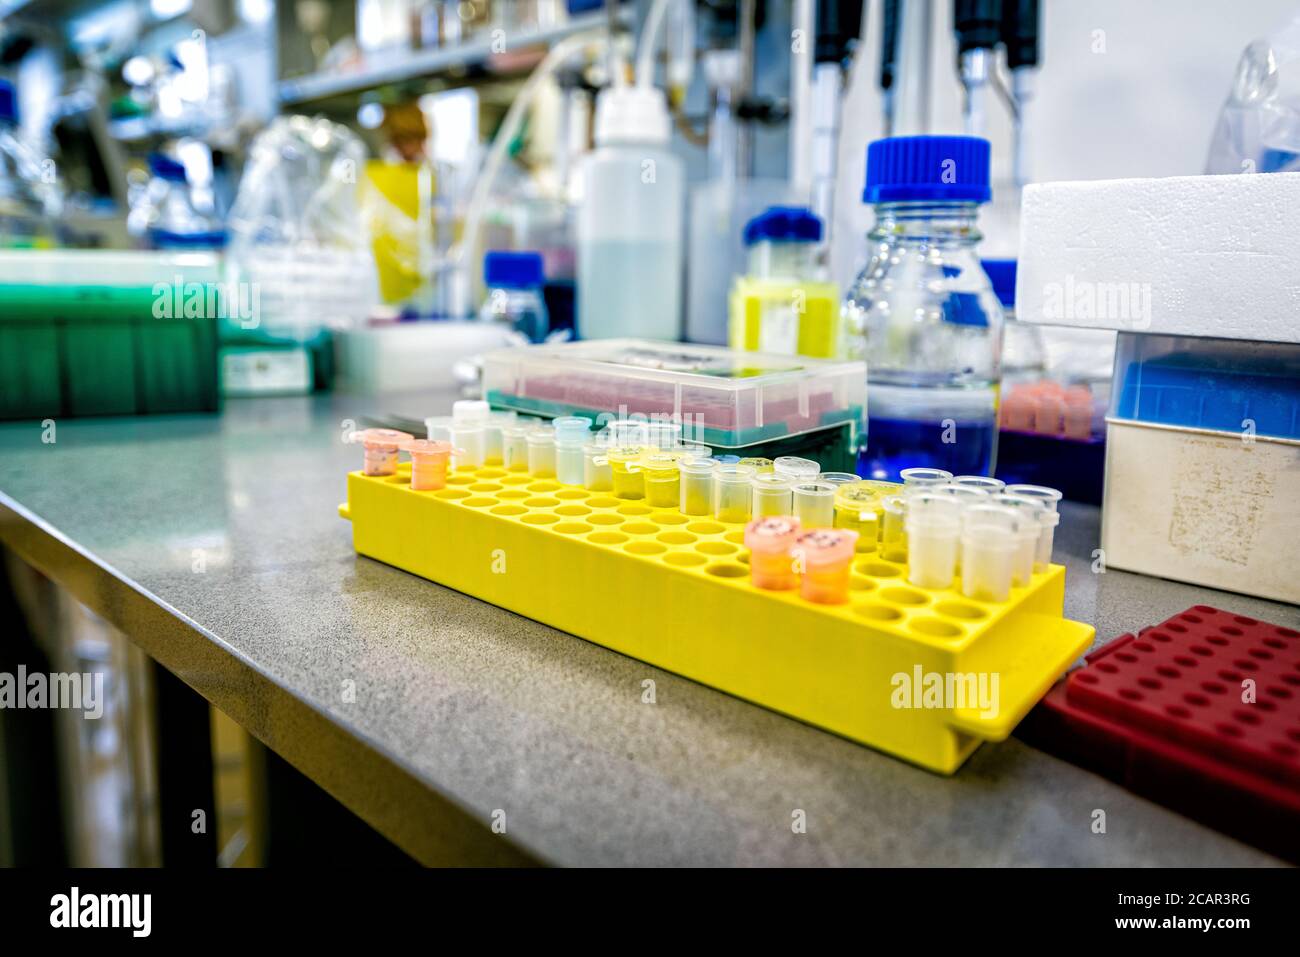 Eppendorf tubes in yellow test tube rack on a desk Stock Photo